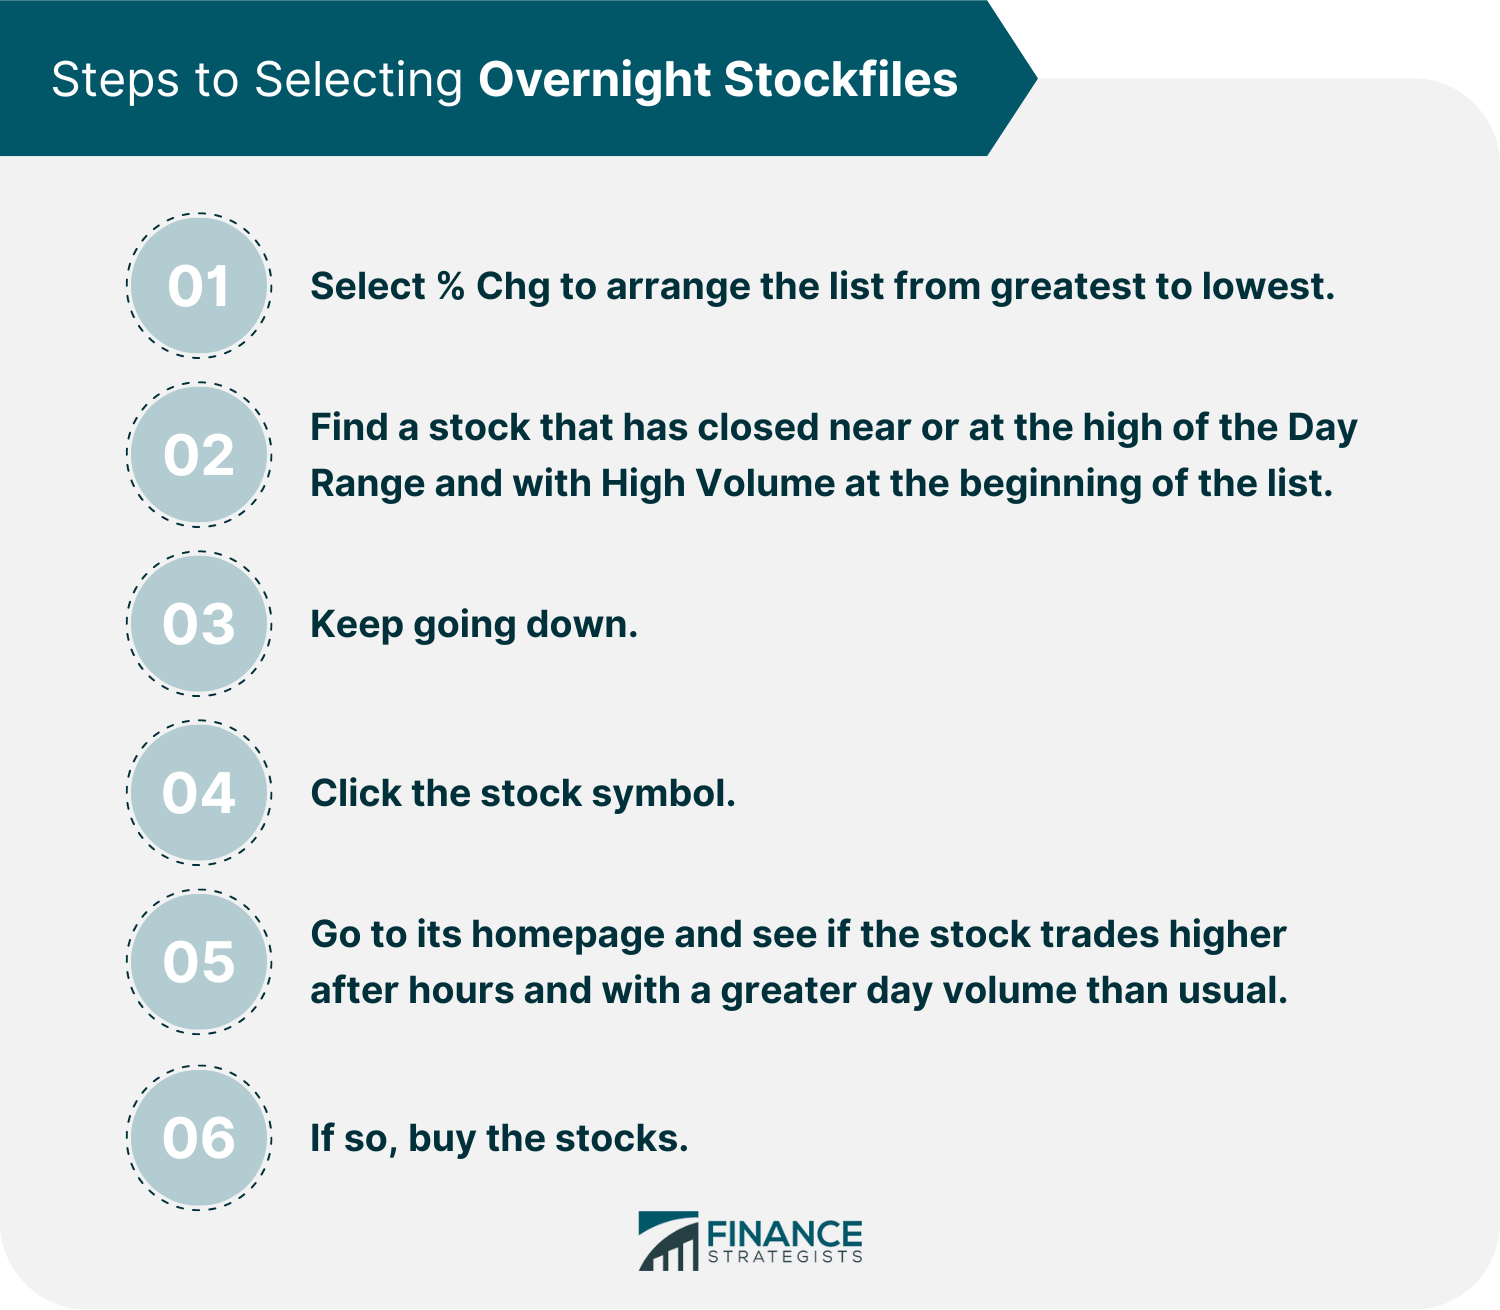 Steps to Selecting Overnight Stockfiles